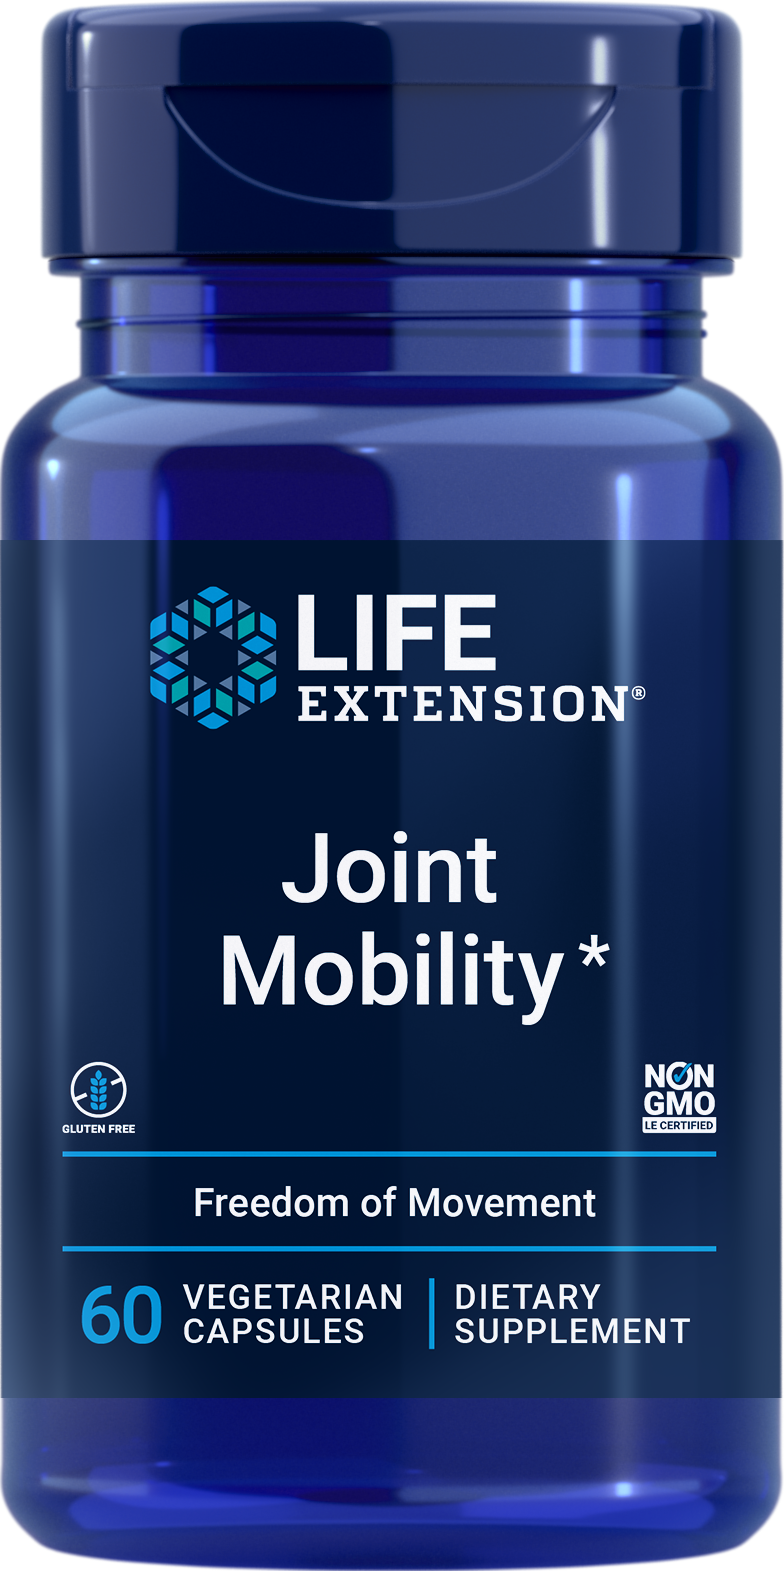 Life Extension new Joint Mobility Supplement non-GMO vegetarian